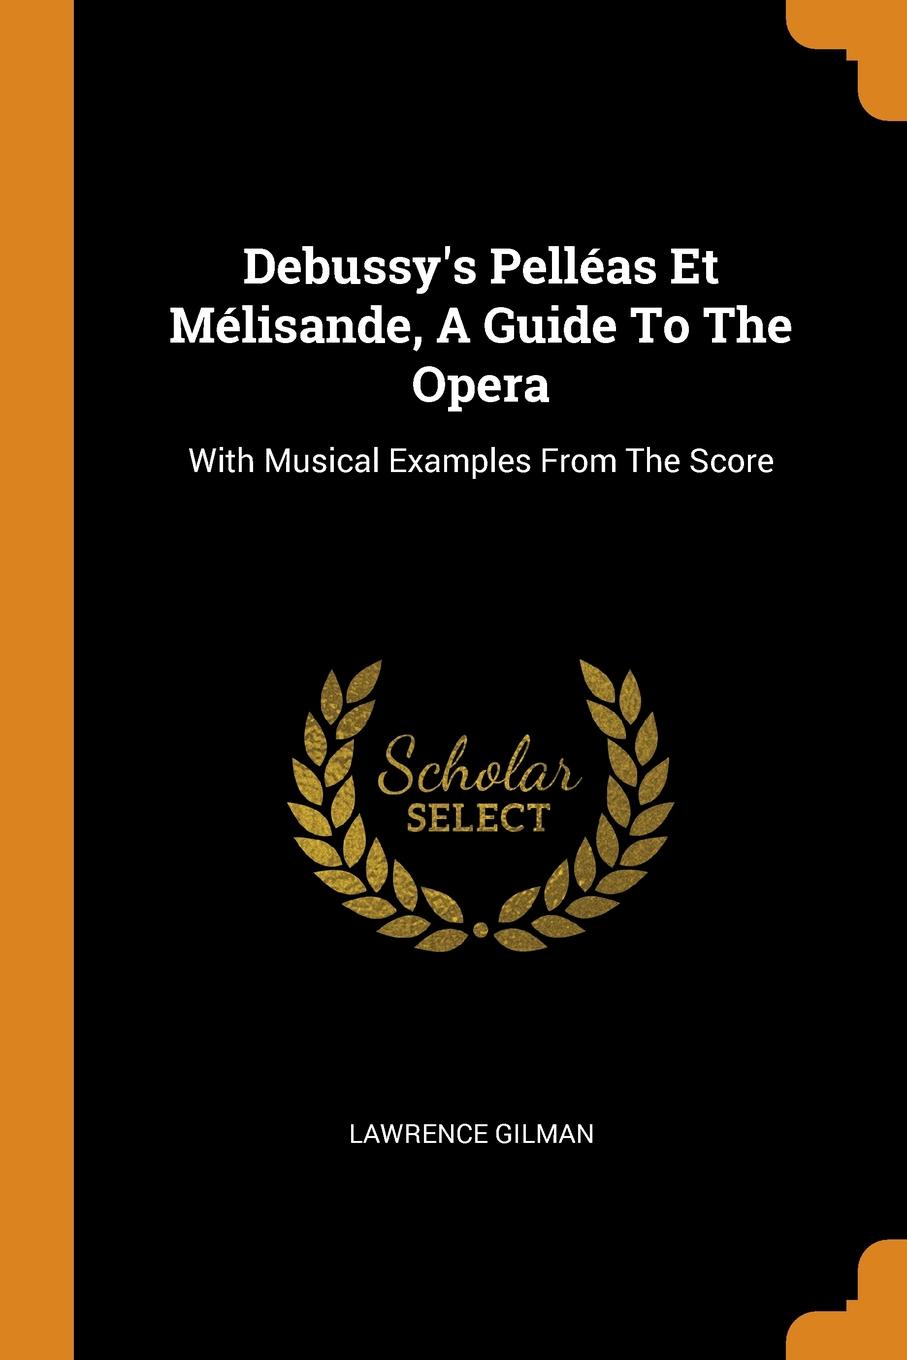 Debussy.s Pelleas Et Melisande, A Guide To The Opera. With Musical Examples From The Score